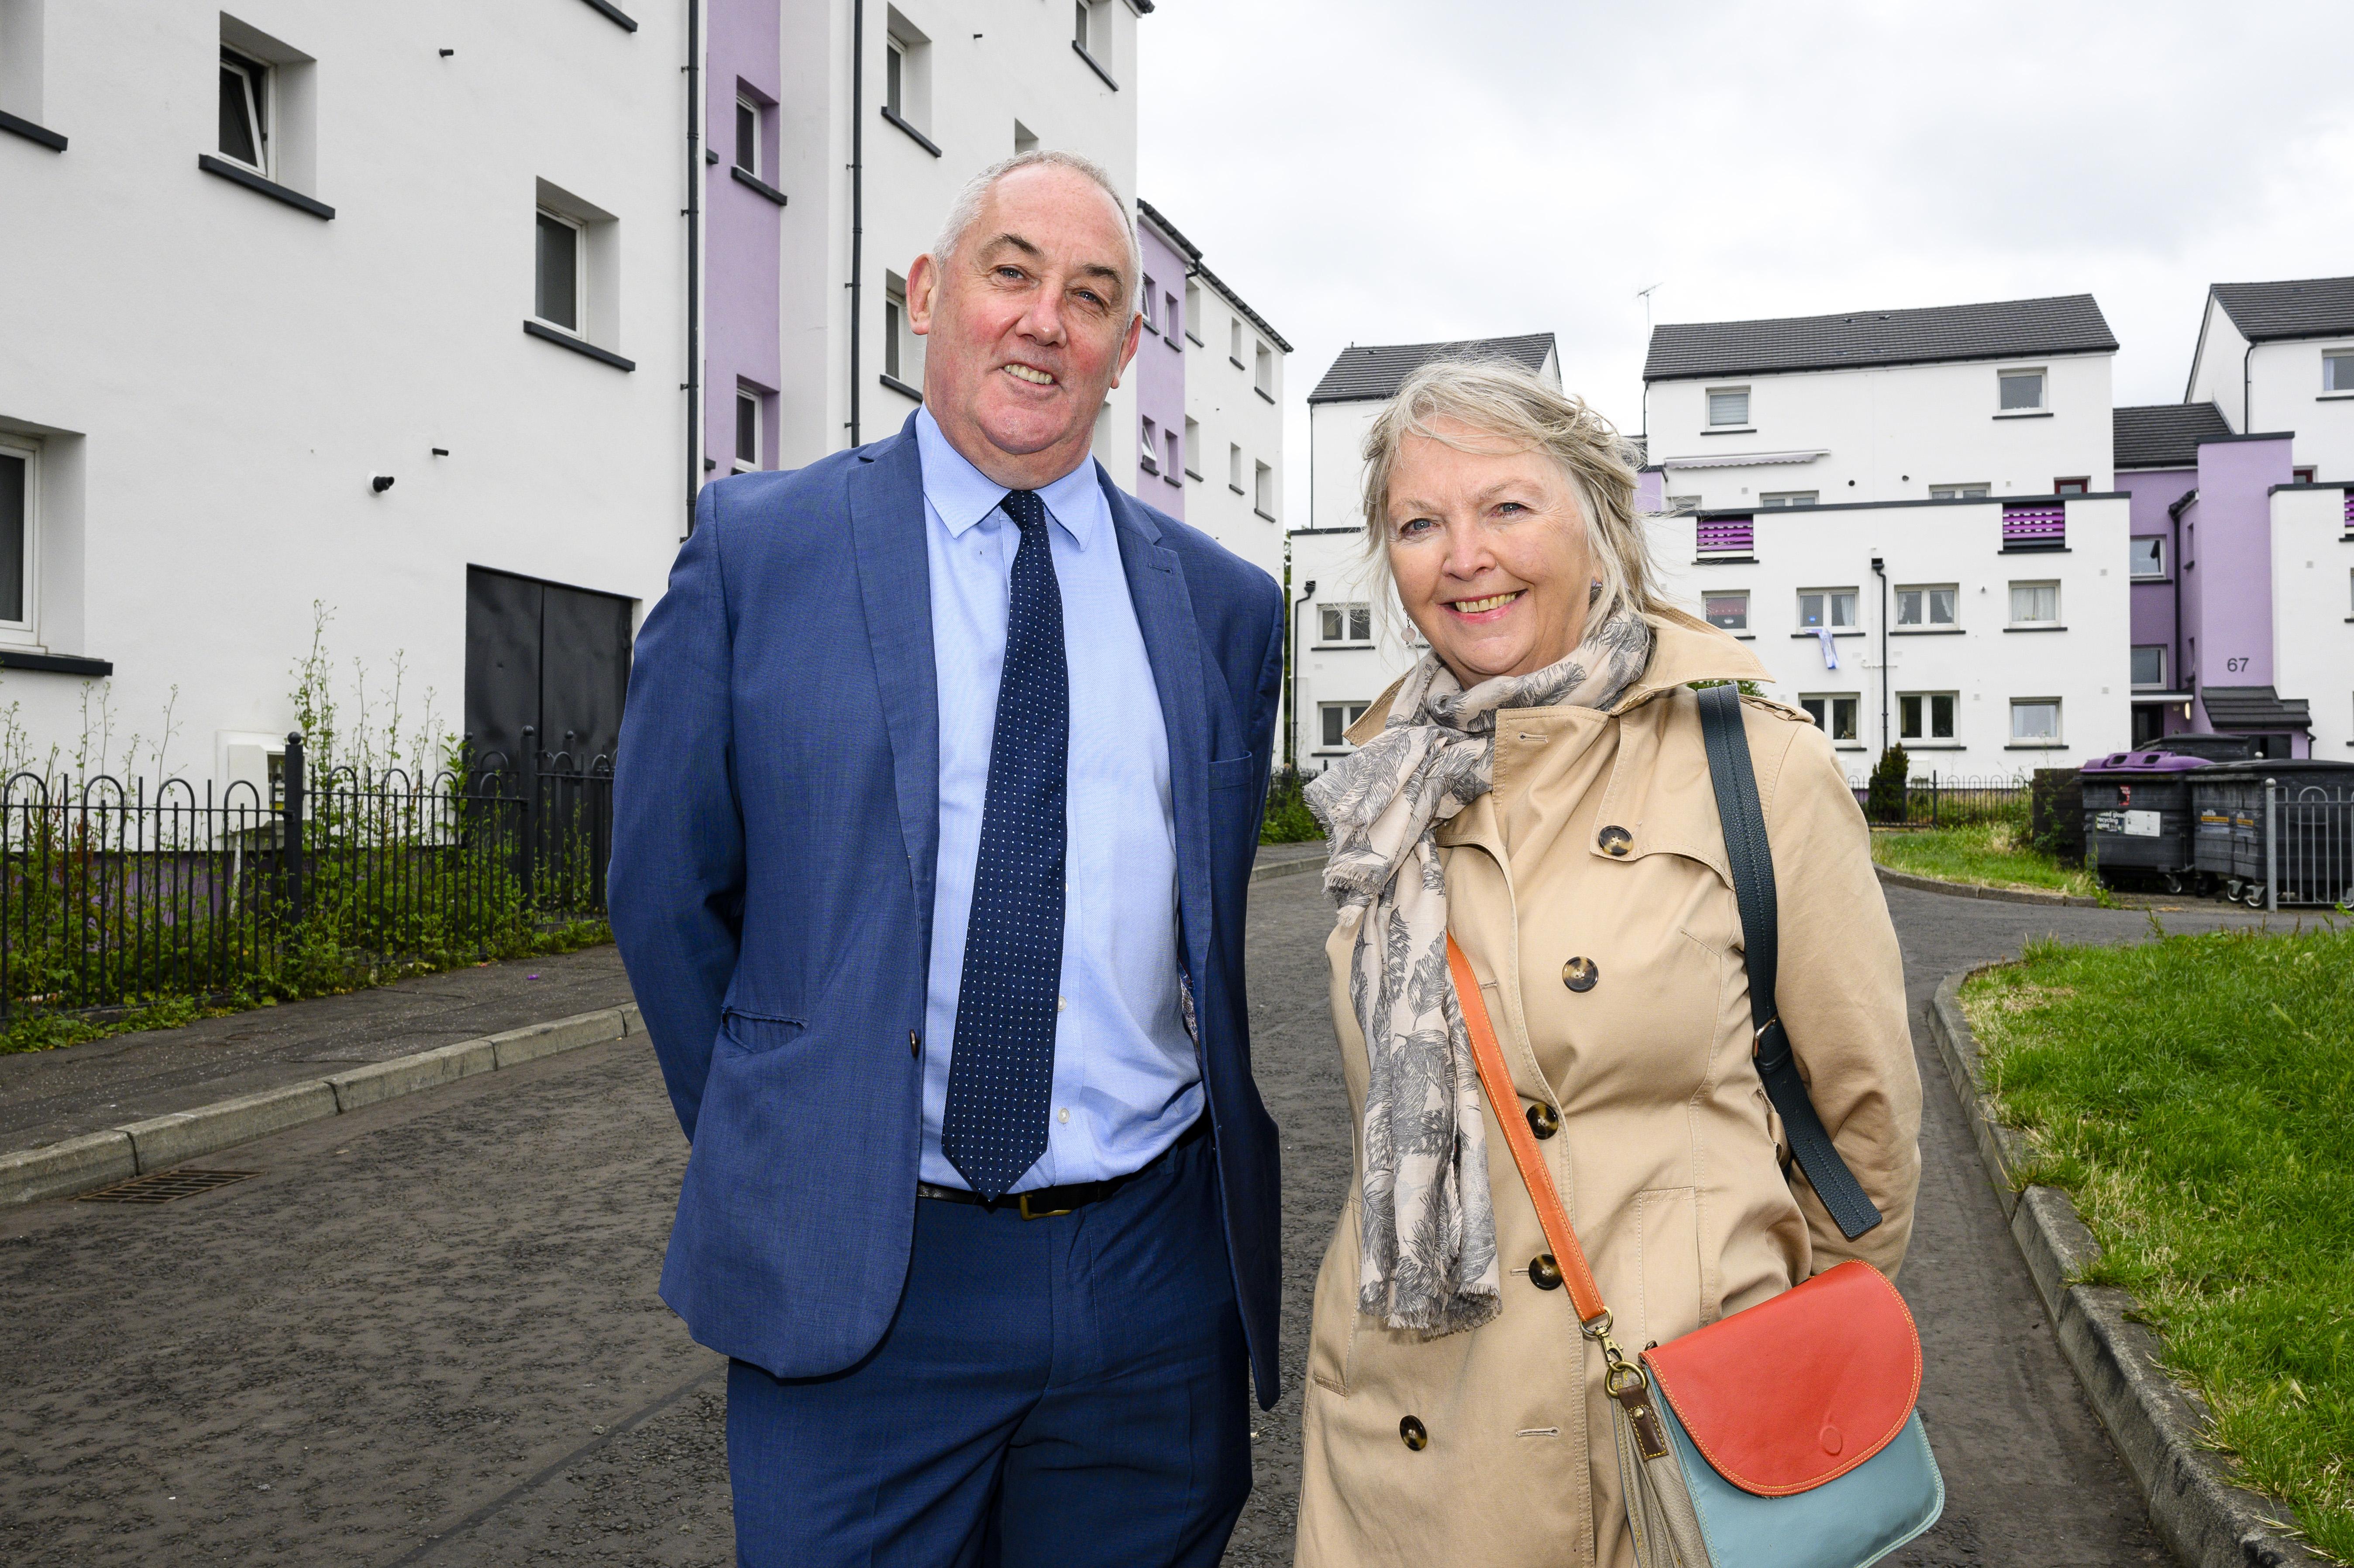 Homes in Wester Hailes are warmer thanks to City of Edinburgh Council pilot